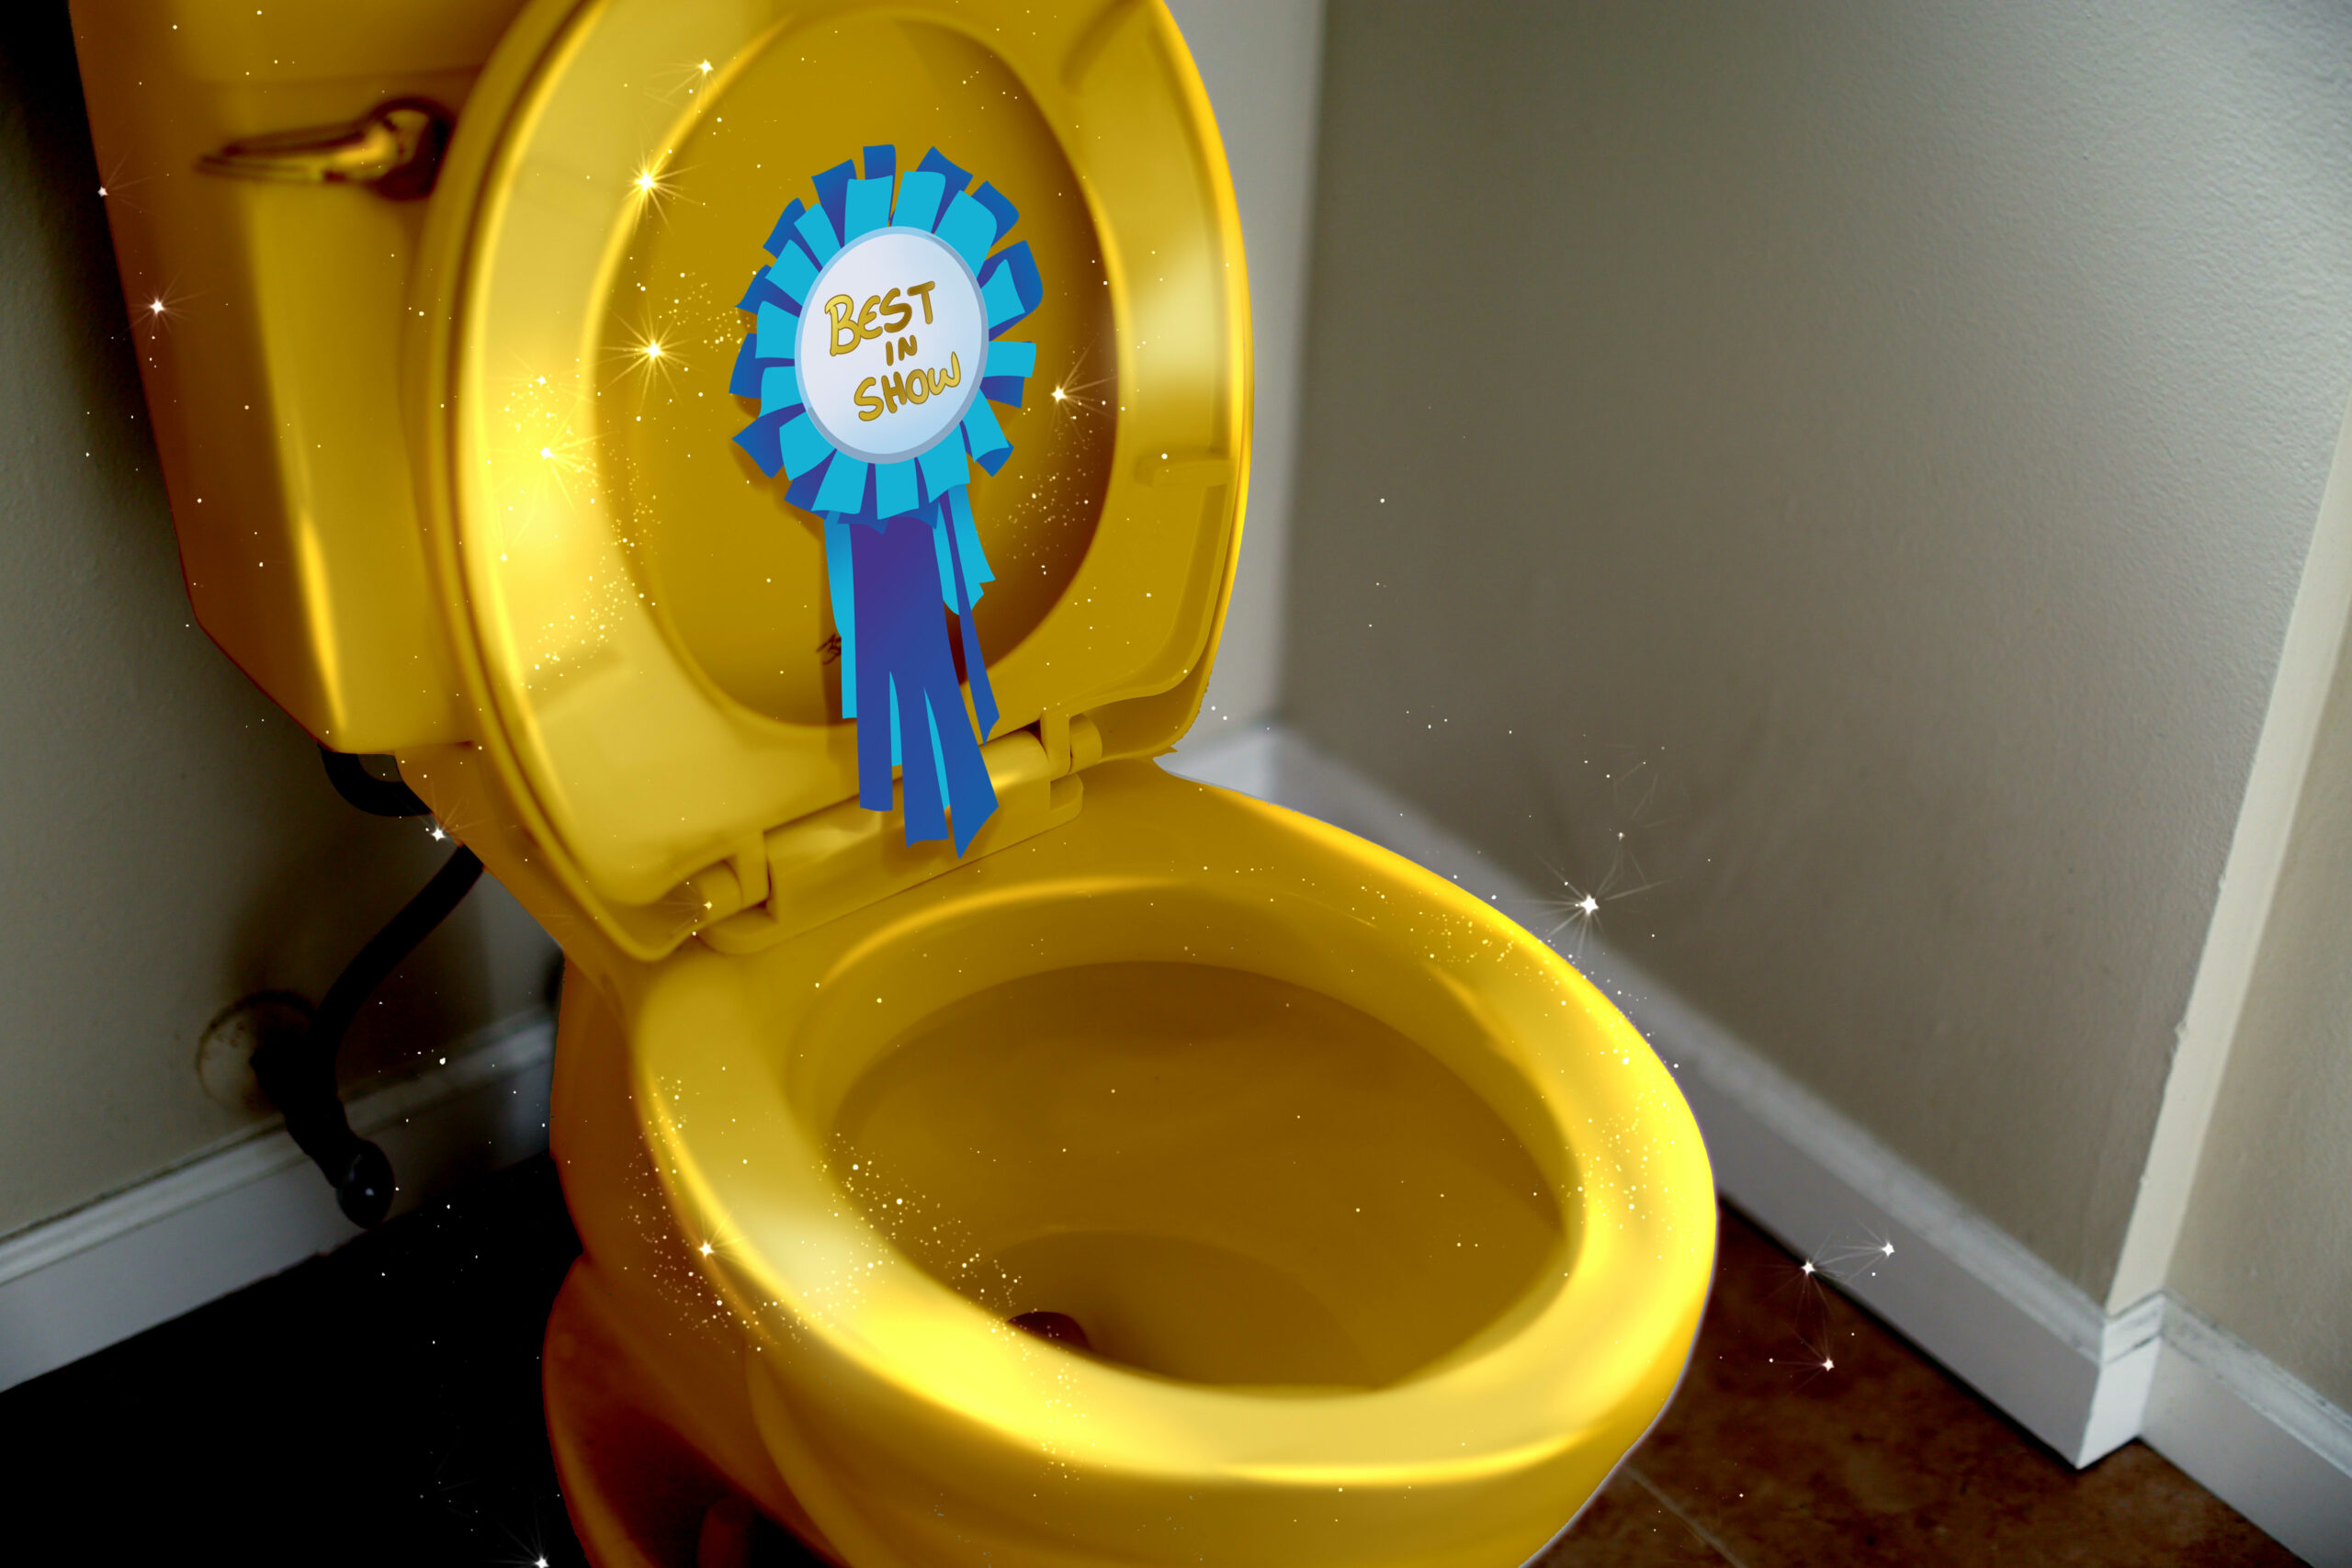 Golden toilet with a best in show award.